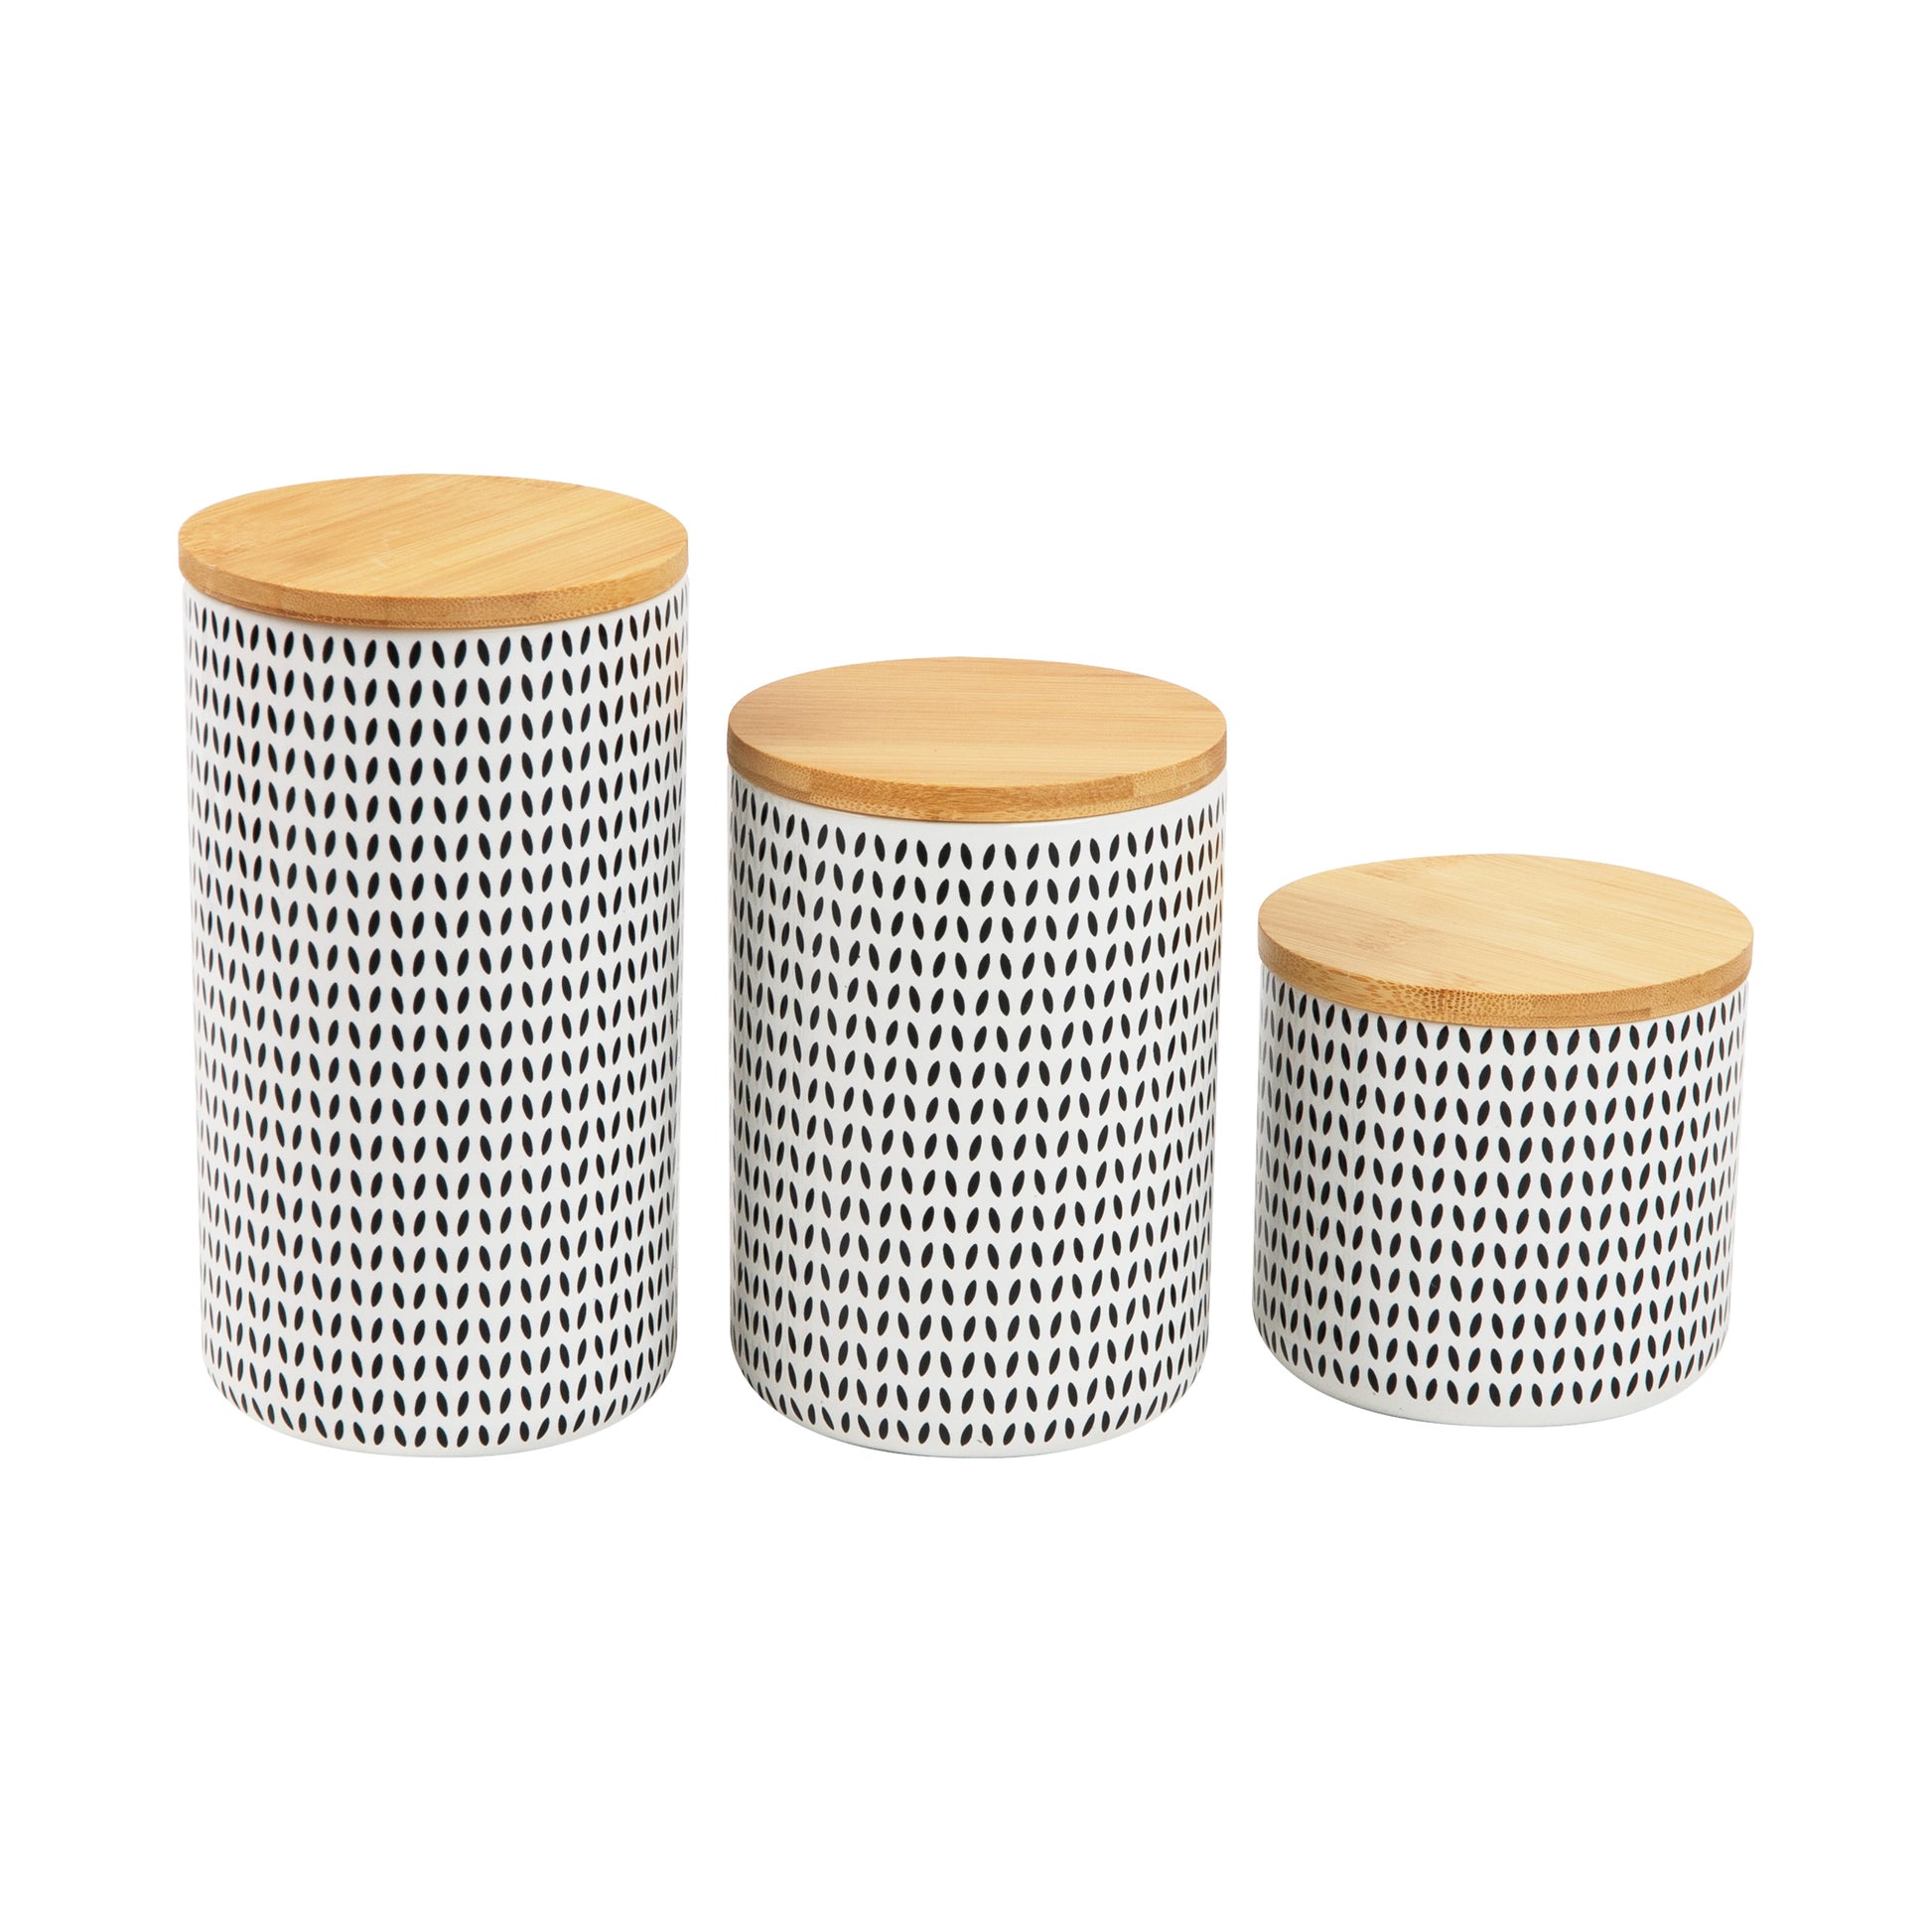 3 Piece Nesting Kitchen Canister Set with Bamboo Lid - Stainless Steel  Modern Storage Containers with Clear View Window by Mindful Design 